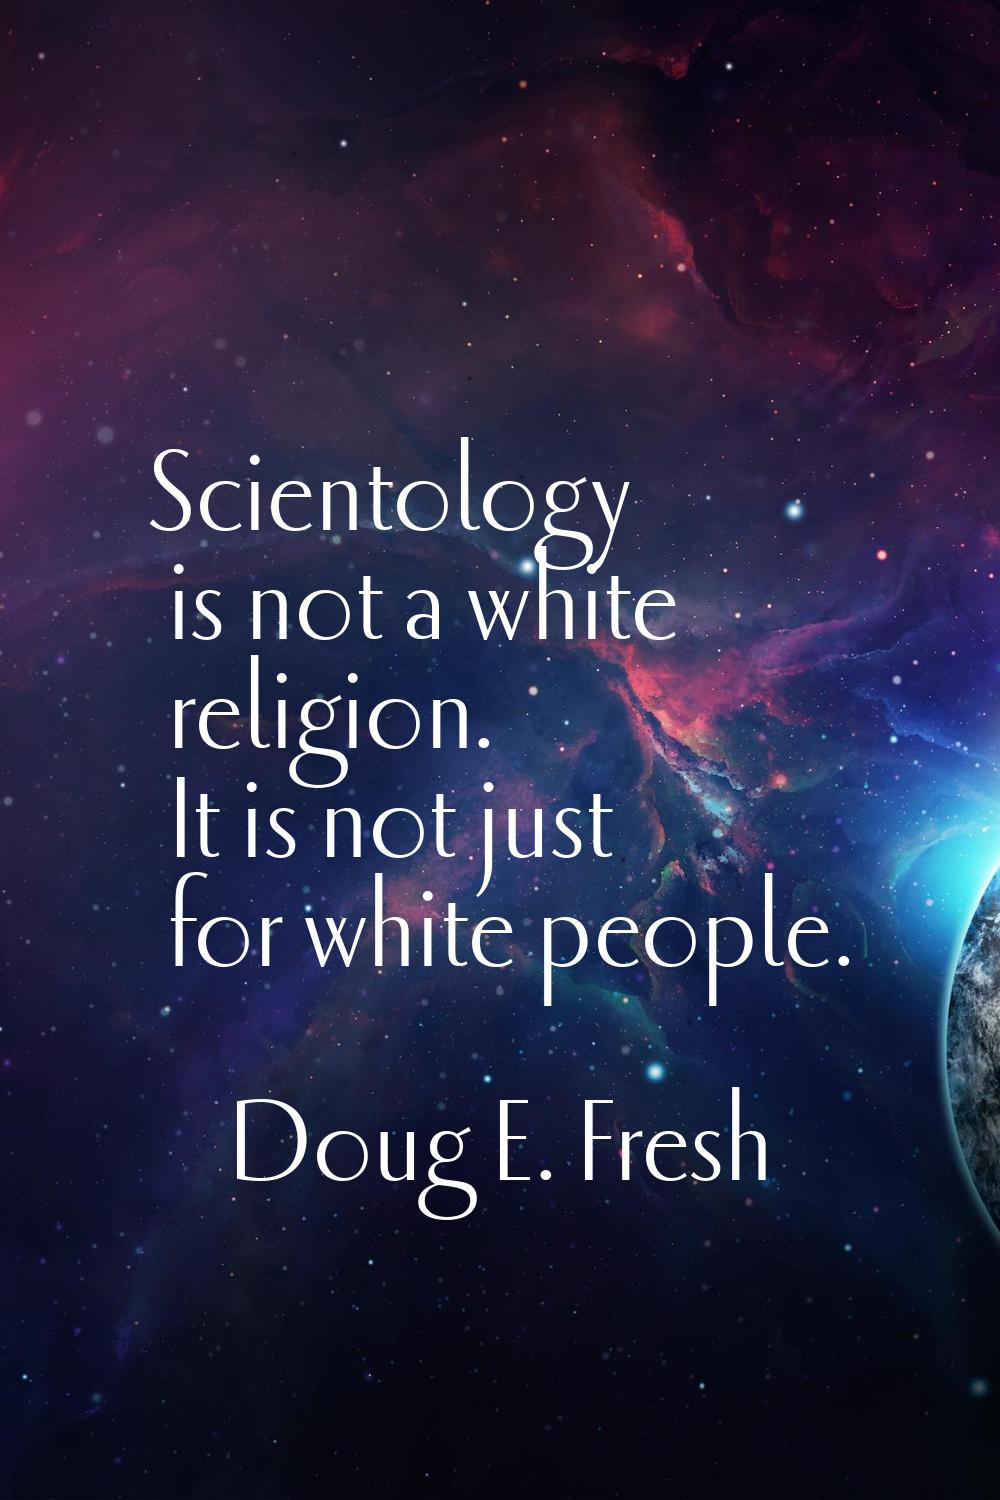 Scientology is not a white religion. It is not just for white people.